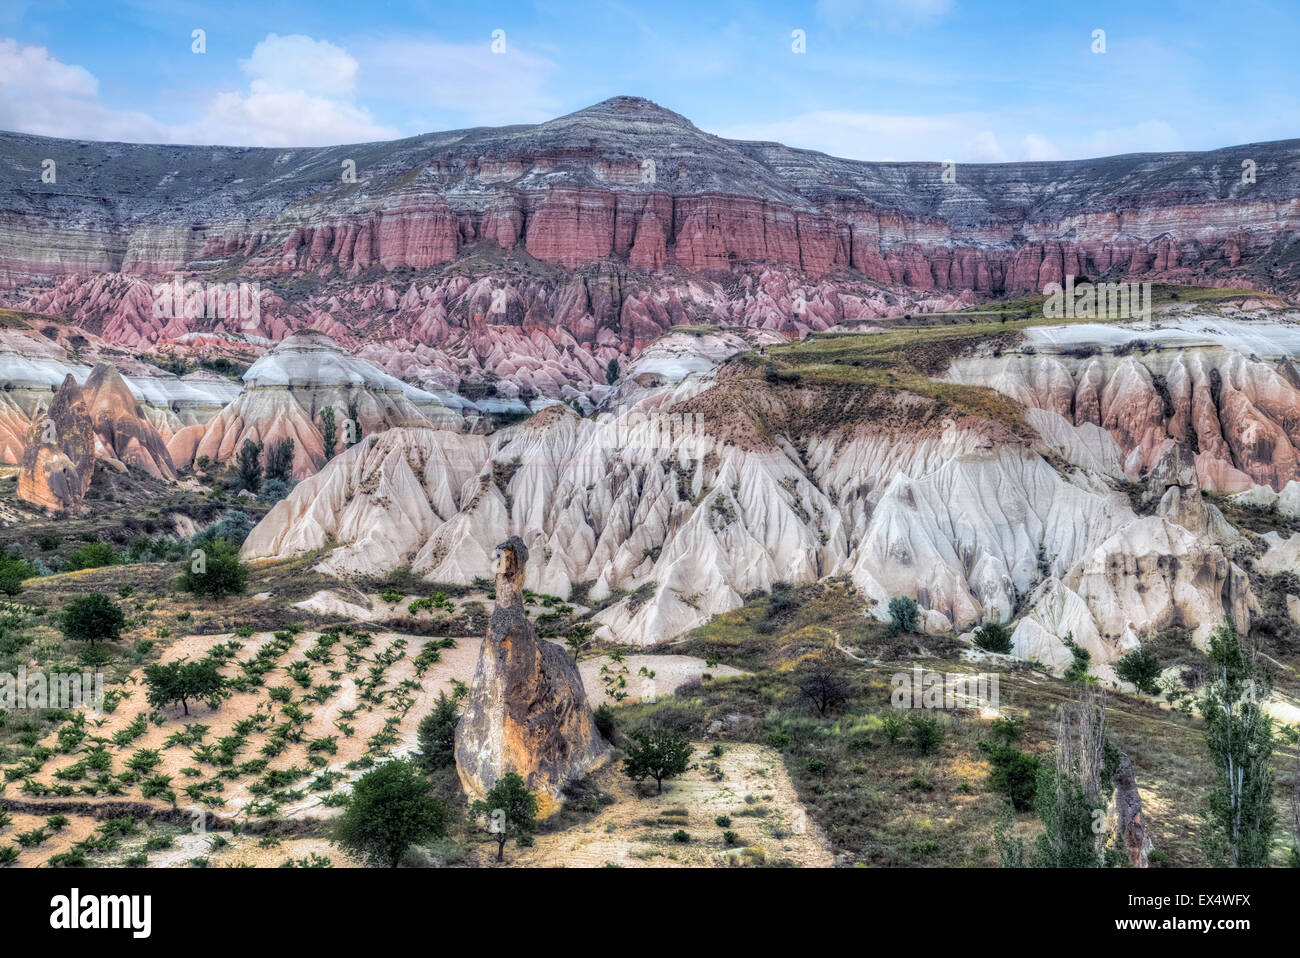 Canyon in Rose Valley, Cappadocia, Turkey Stock Image - Image of